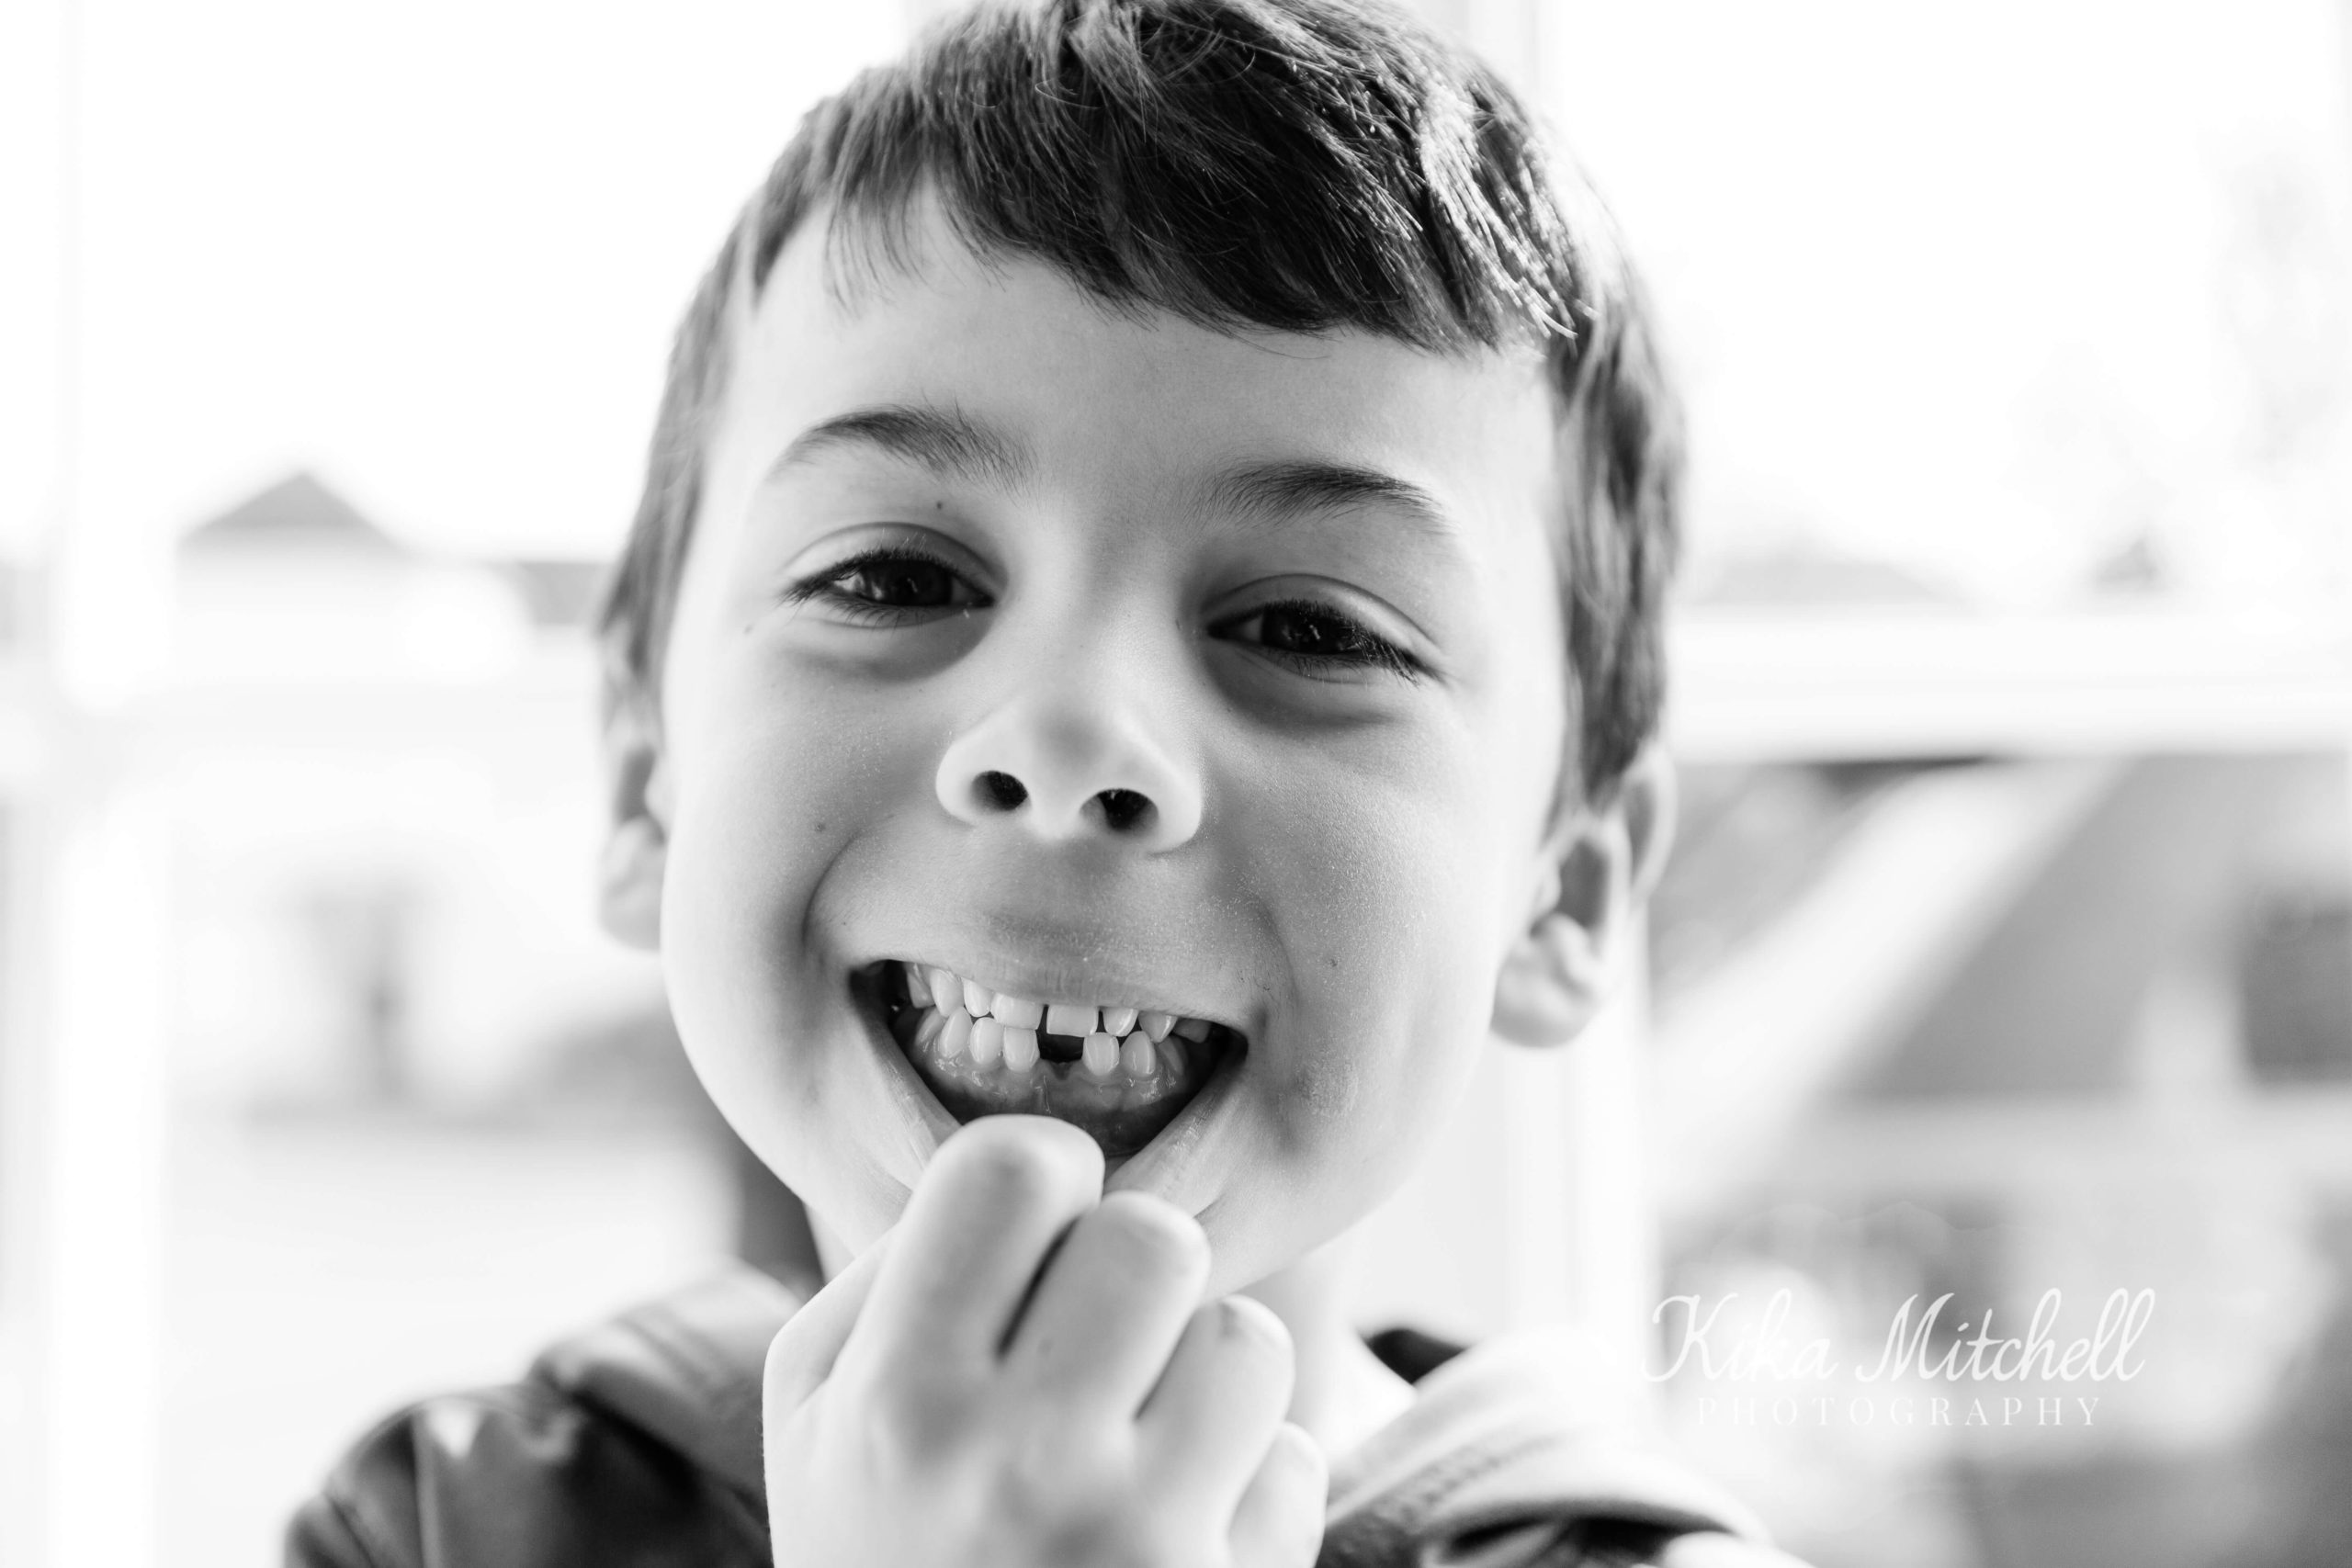 toothless boy smiling showing off the tooth gap in his mouth - black and white photography style shoot